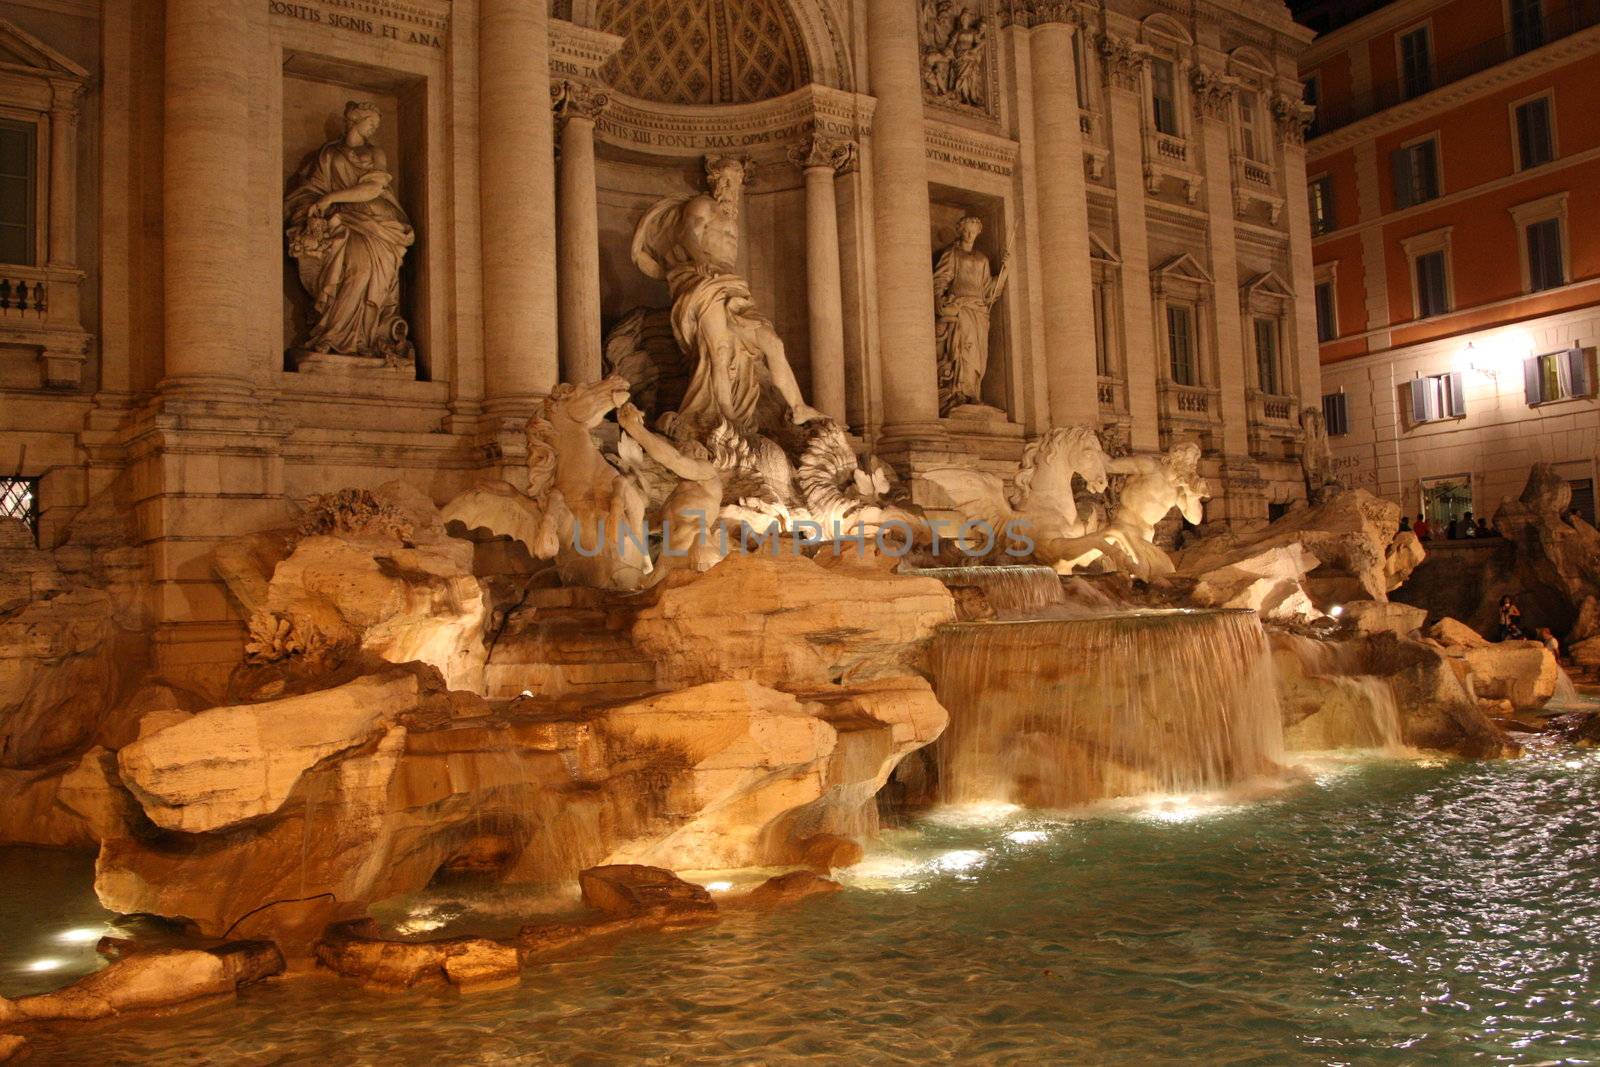 View of the famous Trevi Fountain in Rome, Italy